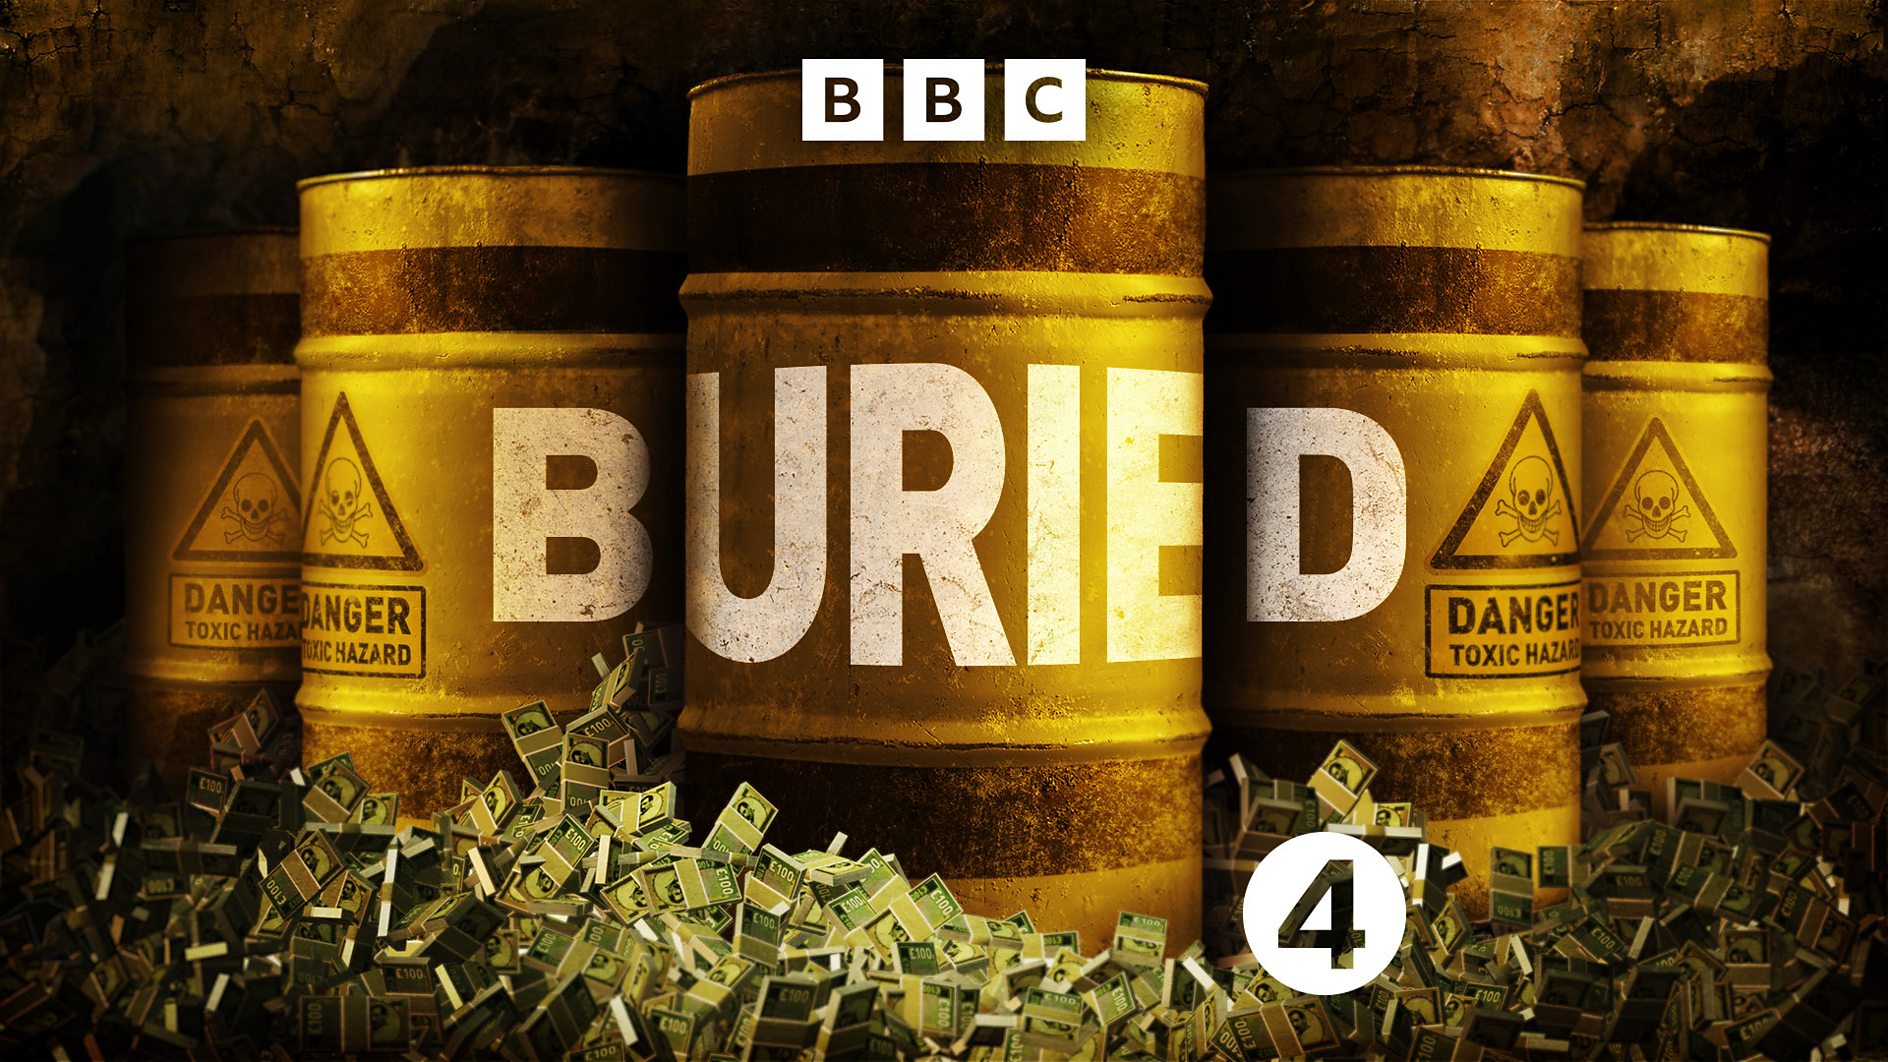 Michael Sheen joins new series of BBC Radio 4’s award-winning podcast Buried from June 24